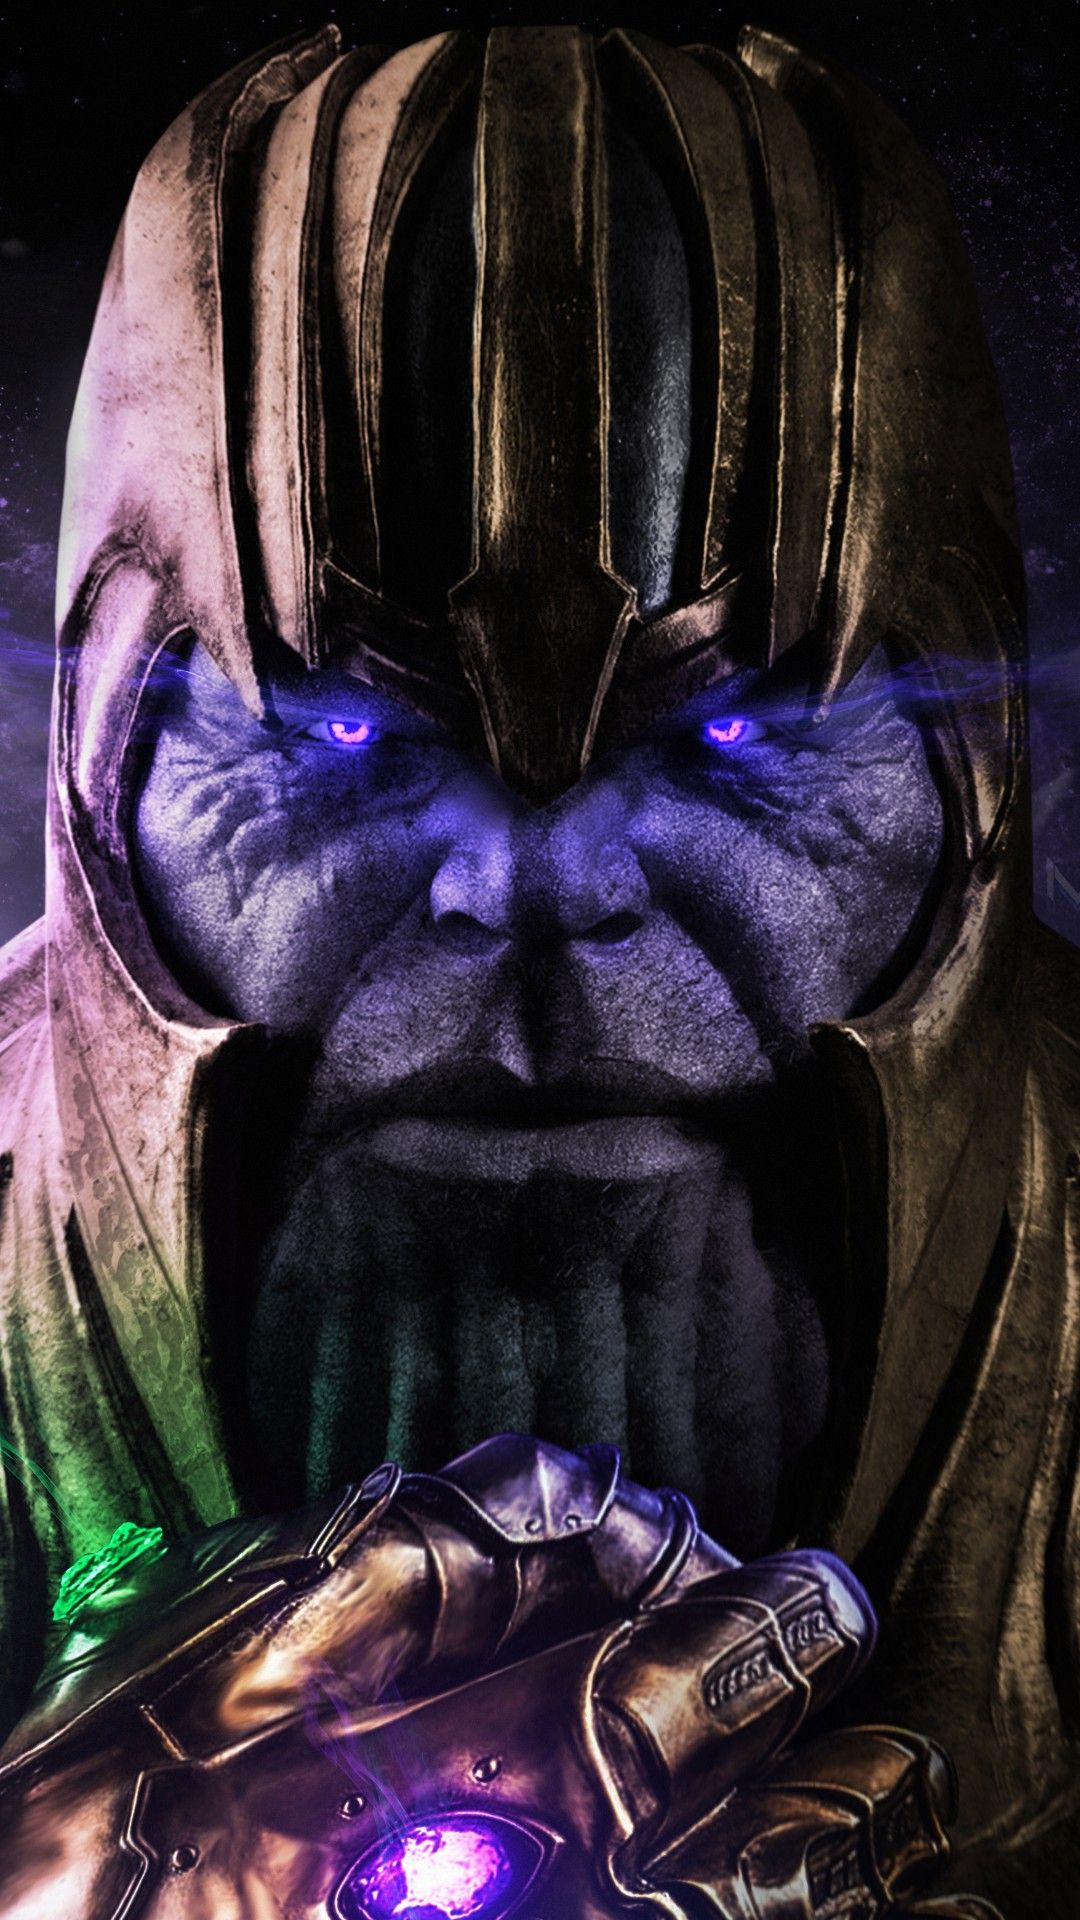 Thanos 4K Ultra HD Wallpapers, HD Thanos 3840x2160 Backgrounds, Free Images  Download